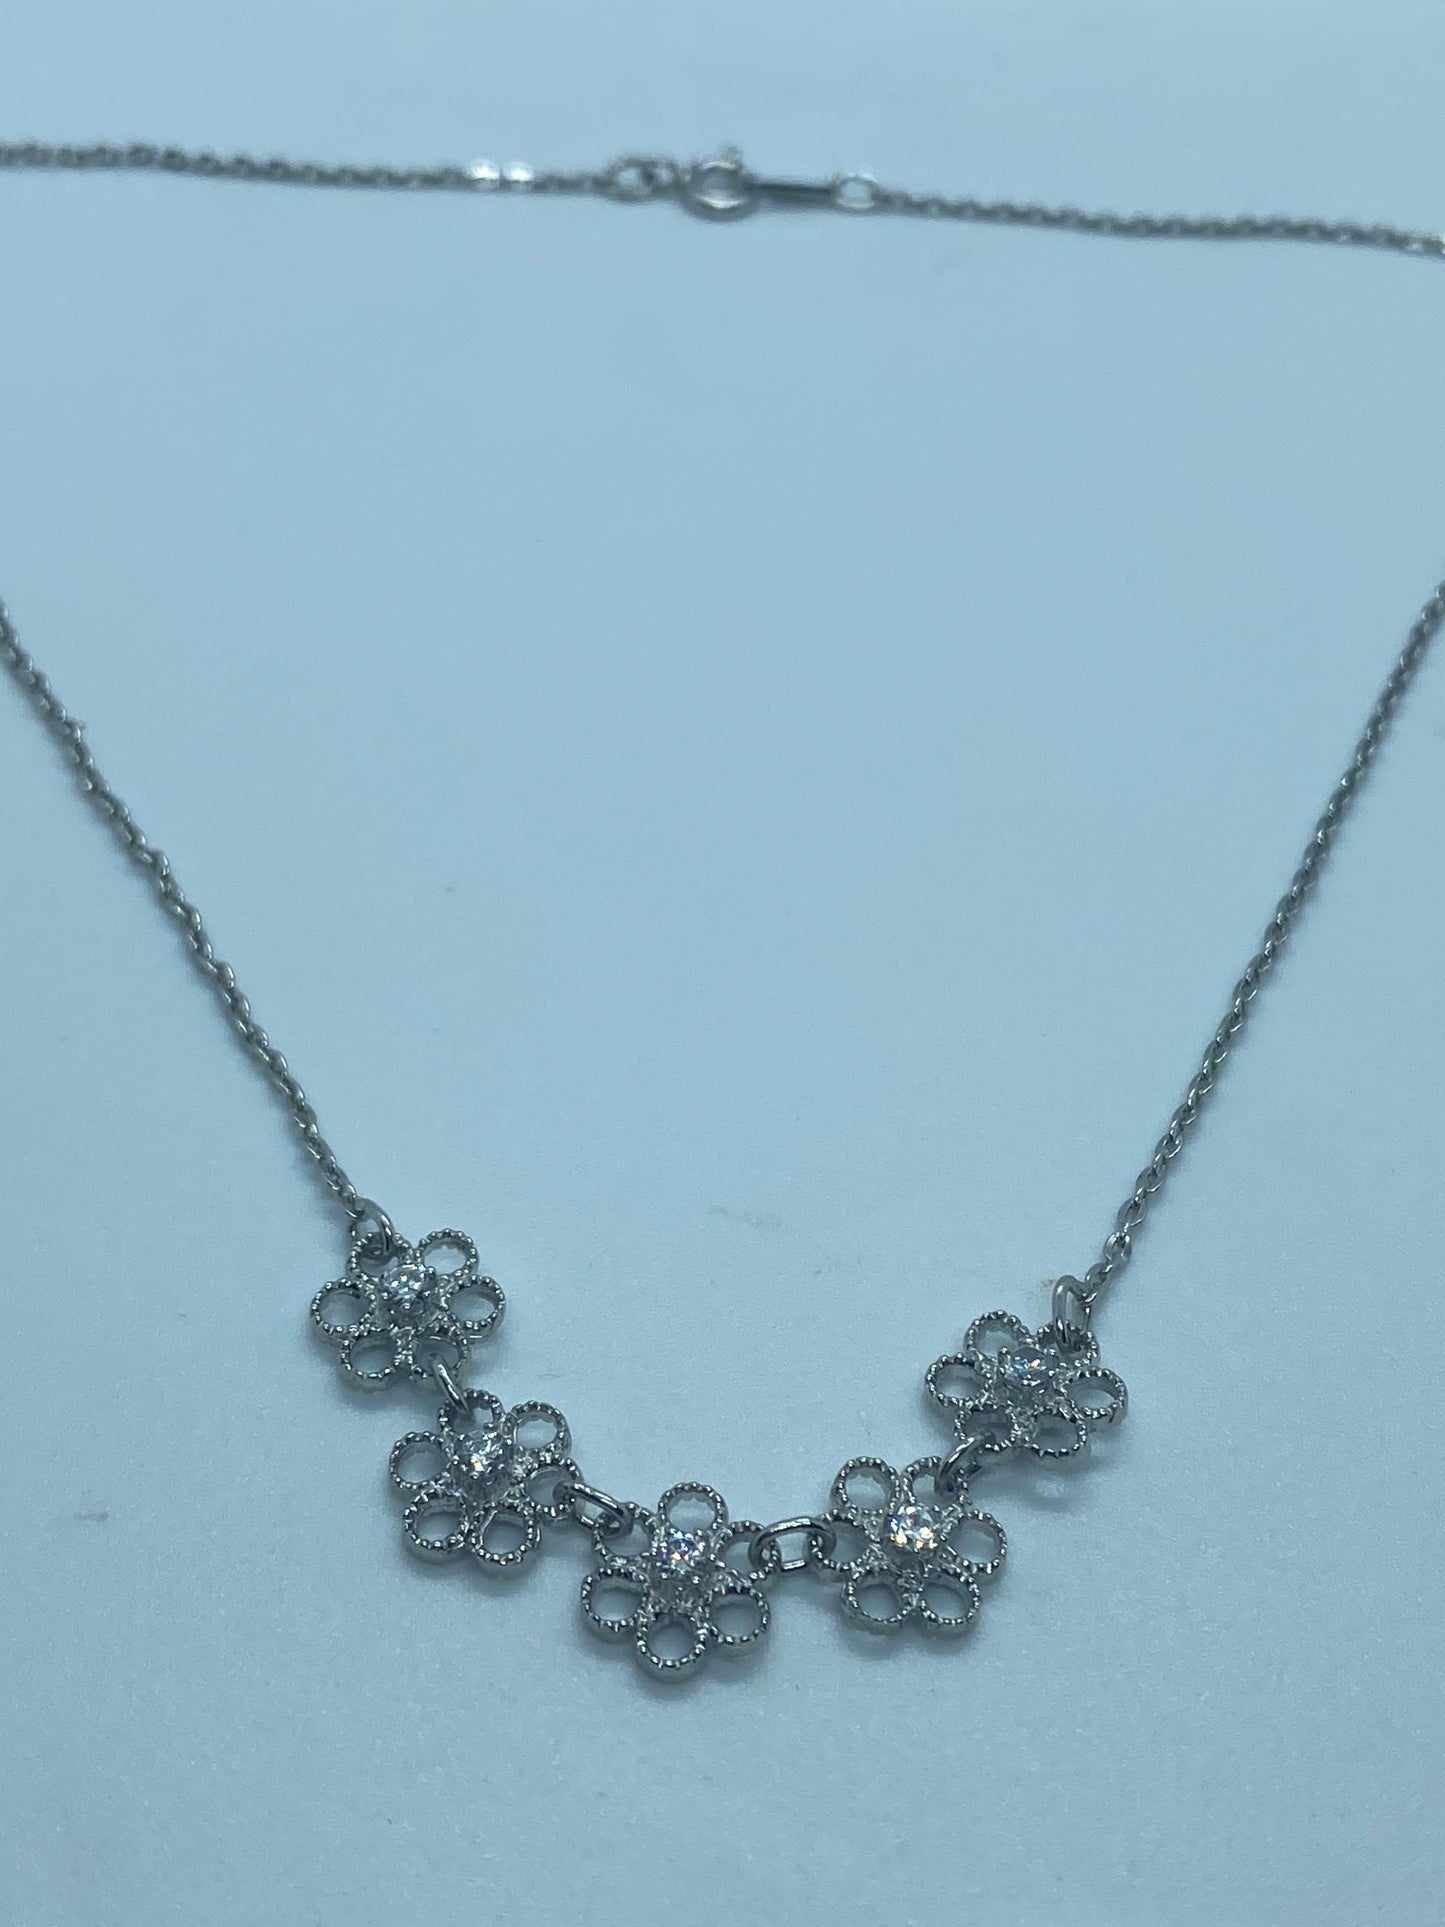 Vintage 925 Sterling Silver White Sapphire Flower 16 inch necklace